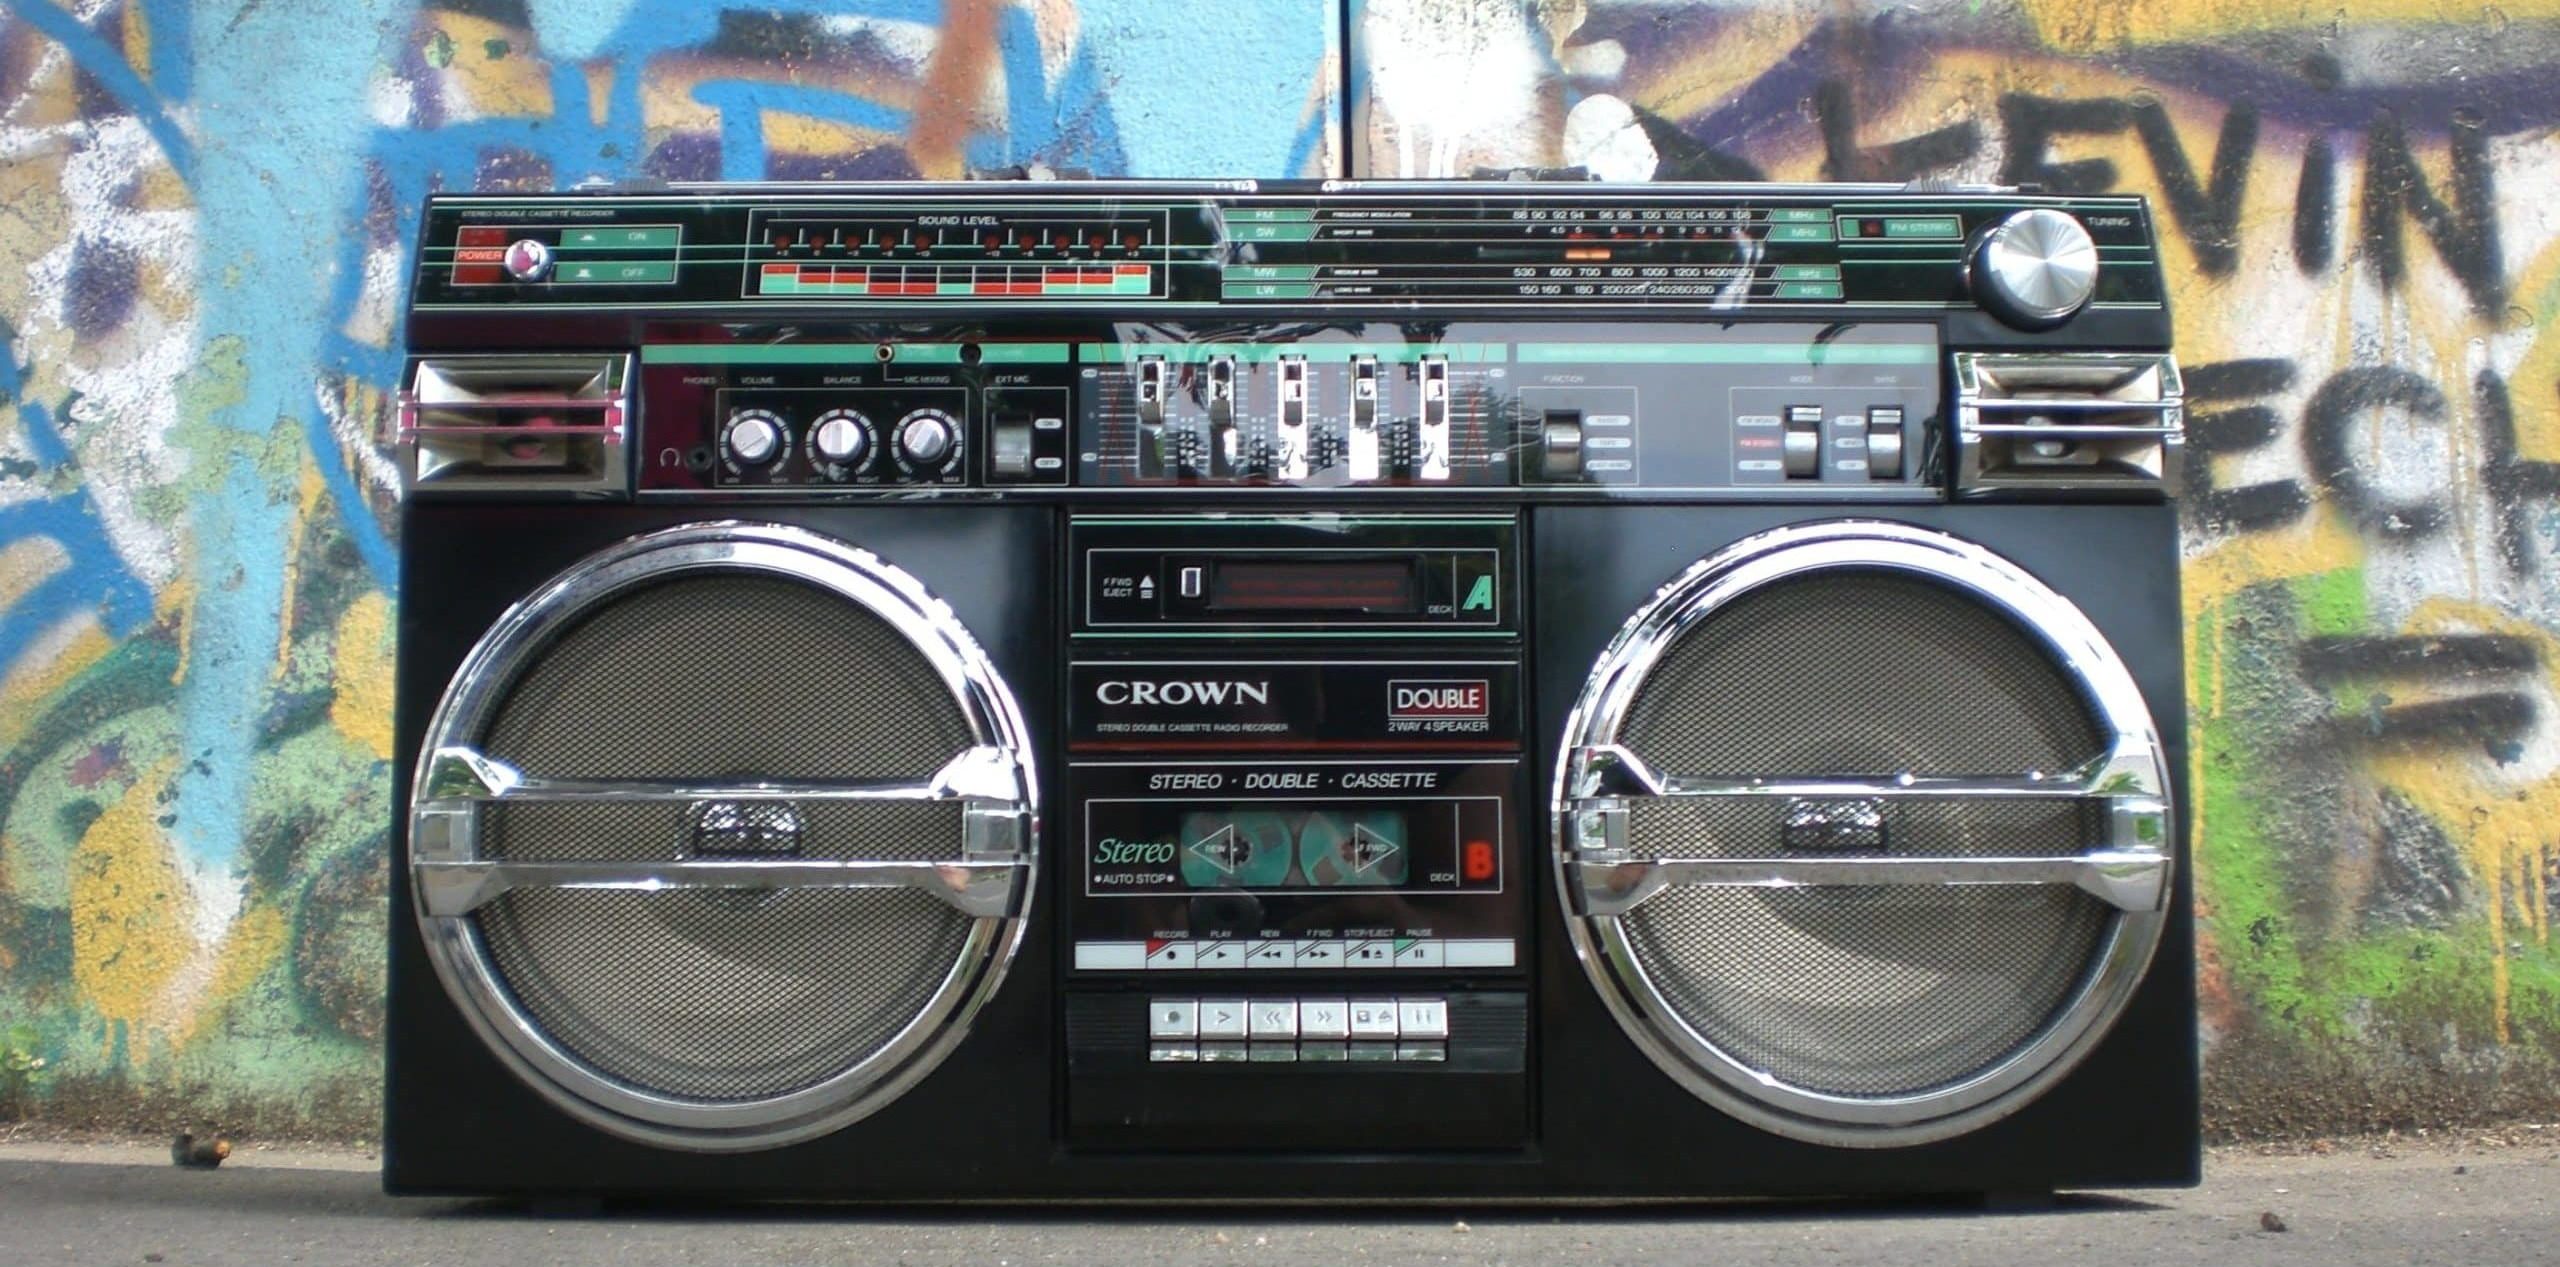 A boom box on the floor in front of a wall of graffiti art